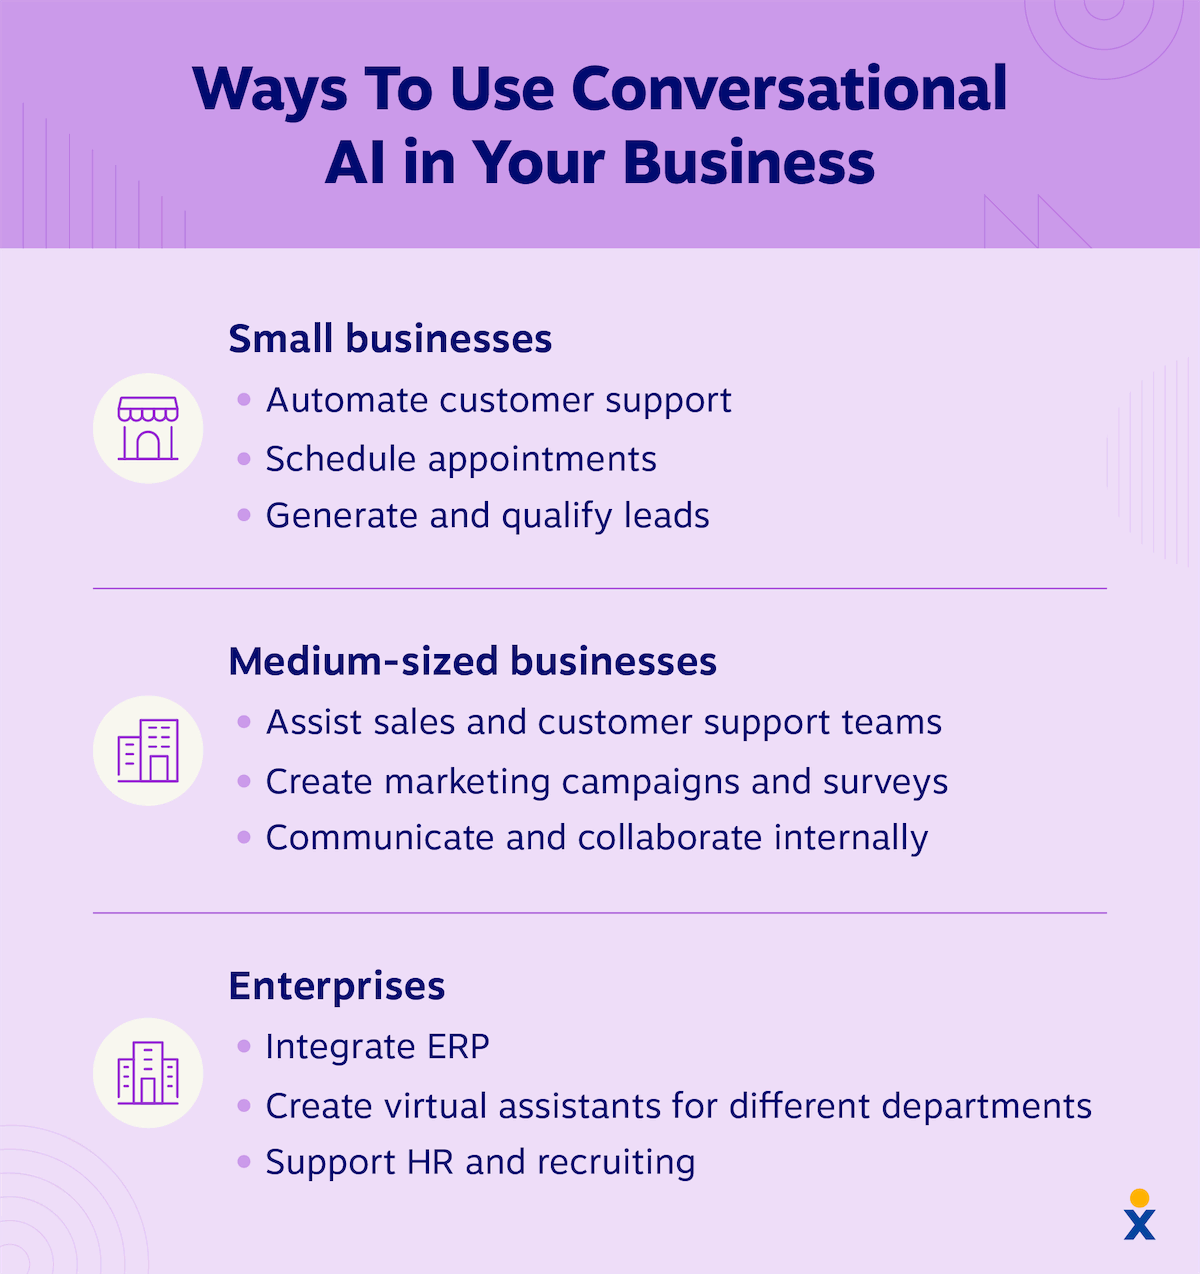 Graphic listing ways to use conversational AI in small, medium and enterprise level businesses.